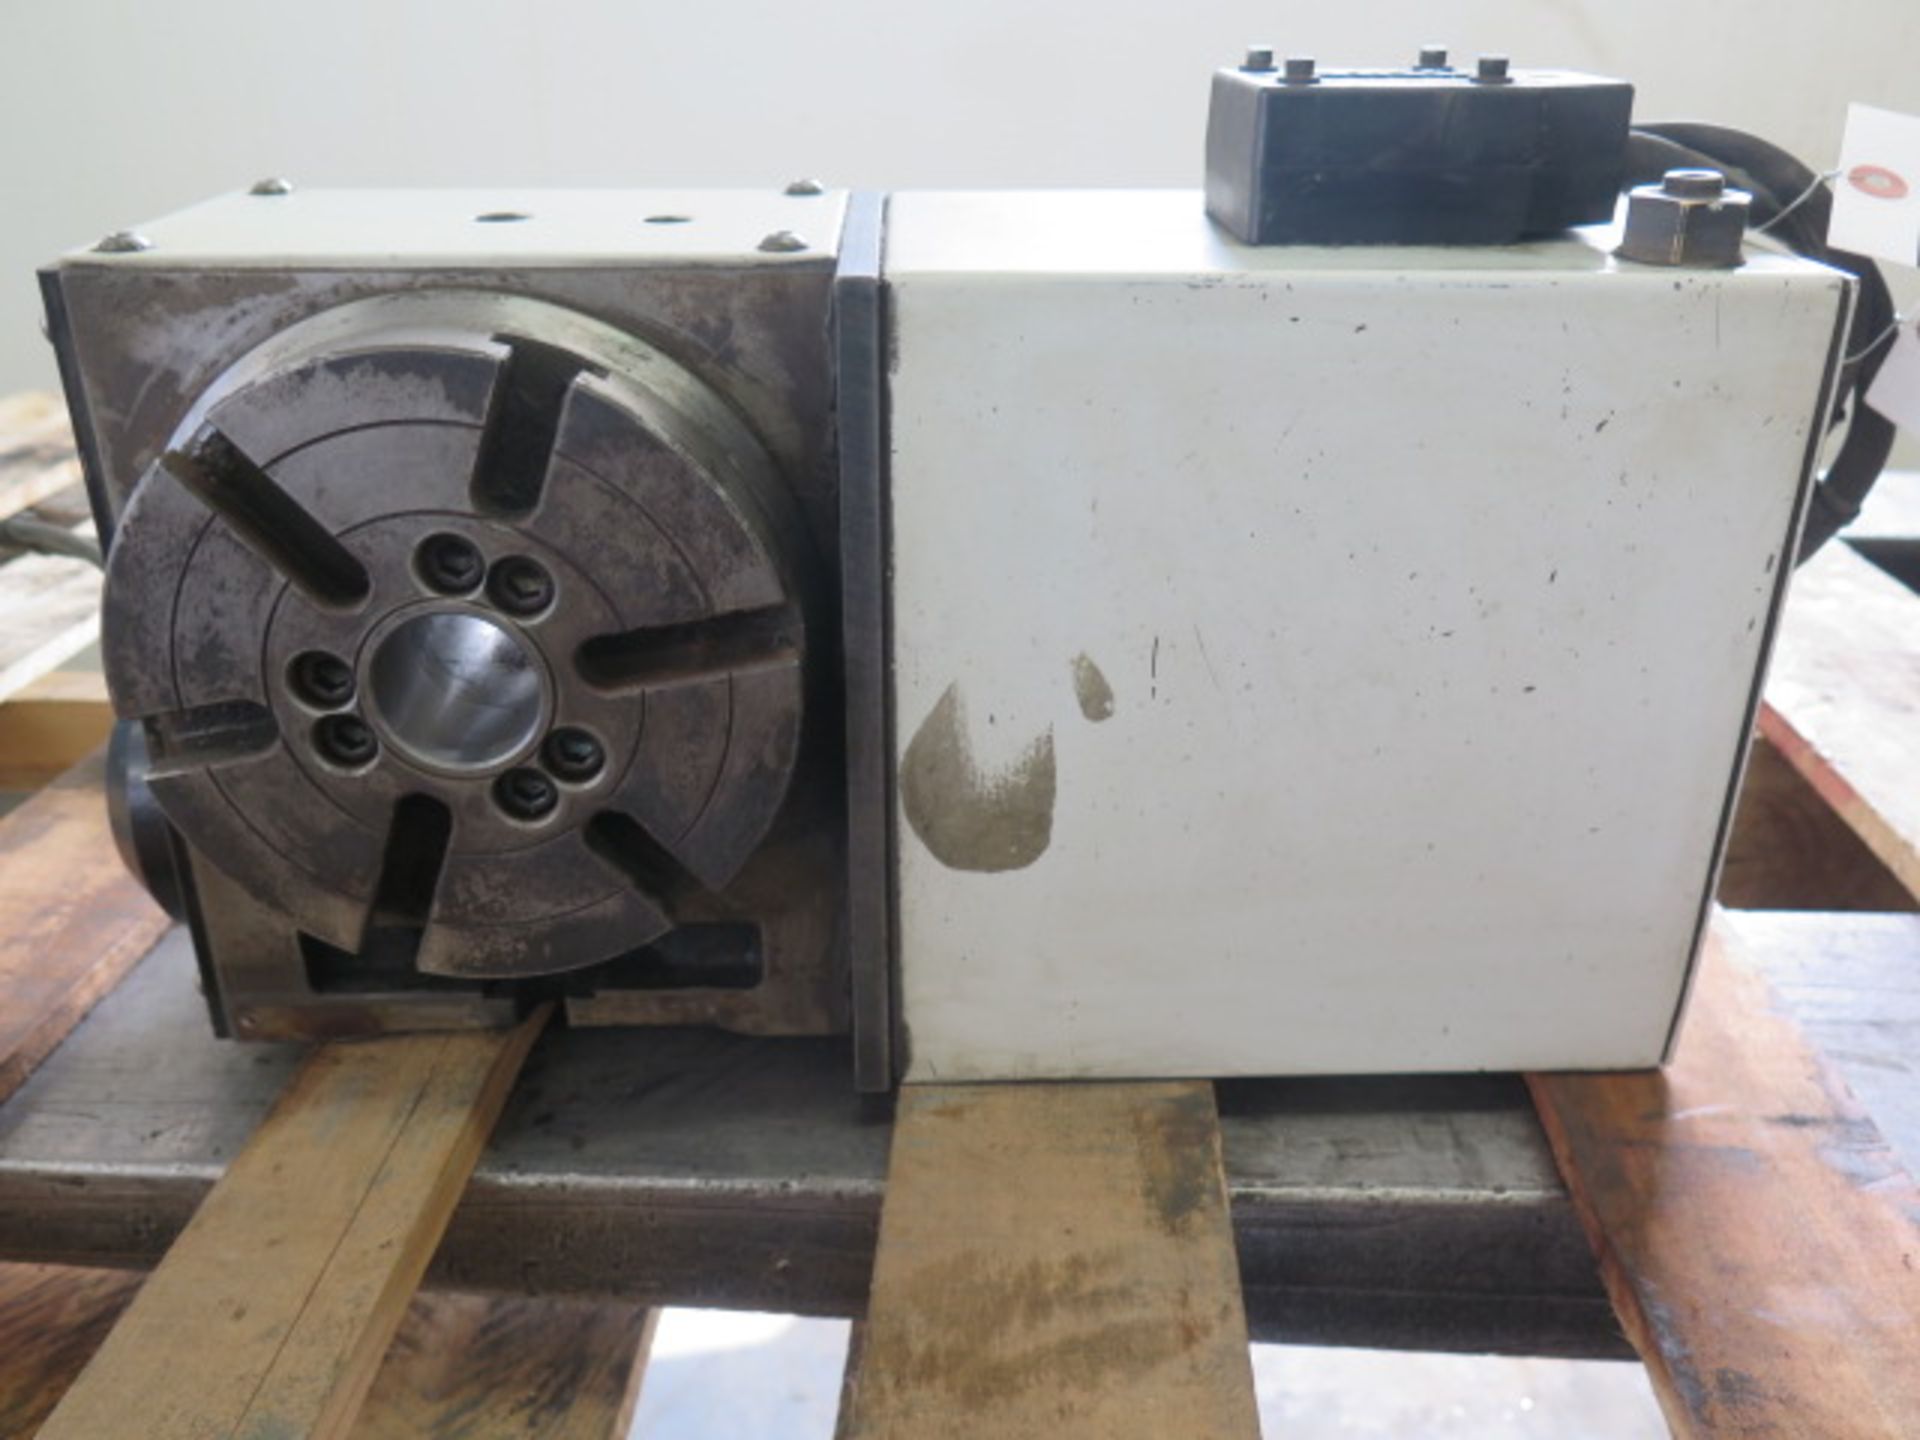 Haas HRT160 6” 4th Axis Rotary Indexer s/n 162672 (Change Parameter #45 VALUE from “0” to “16384”)